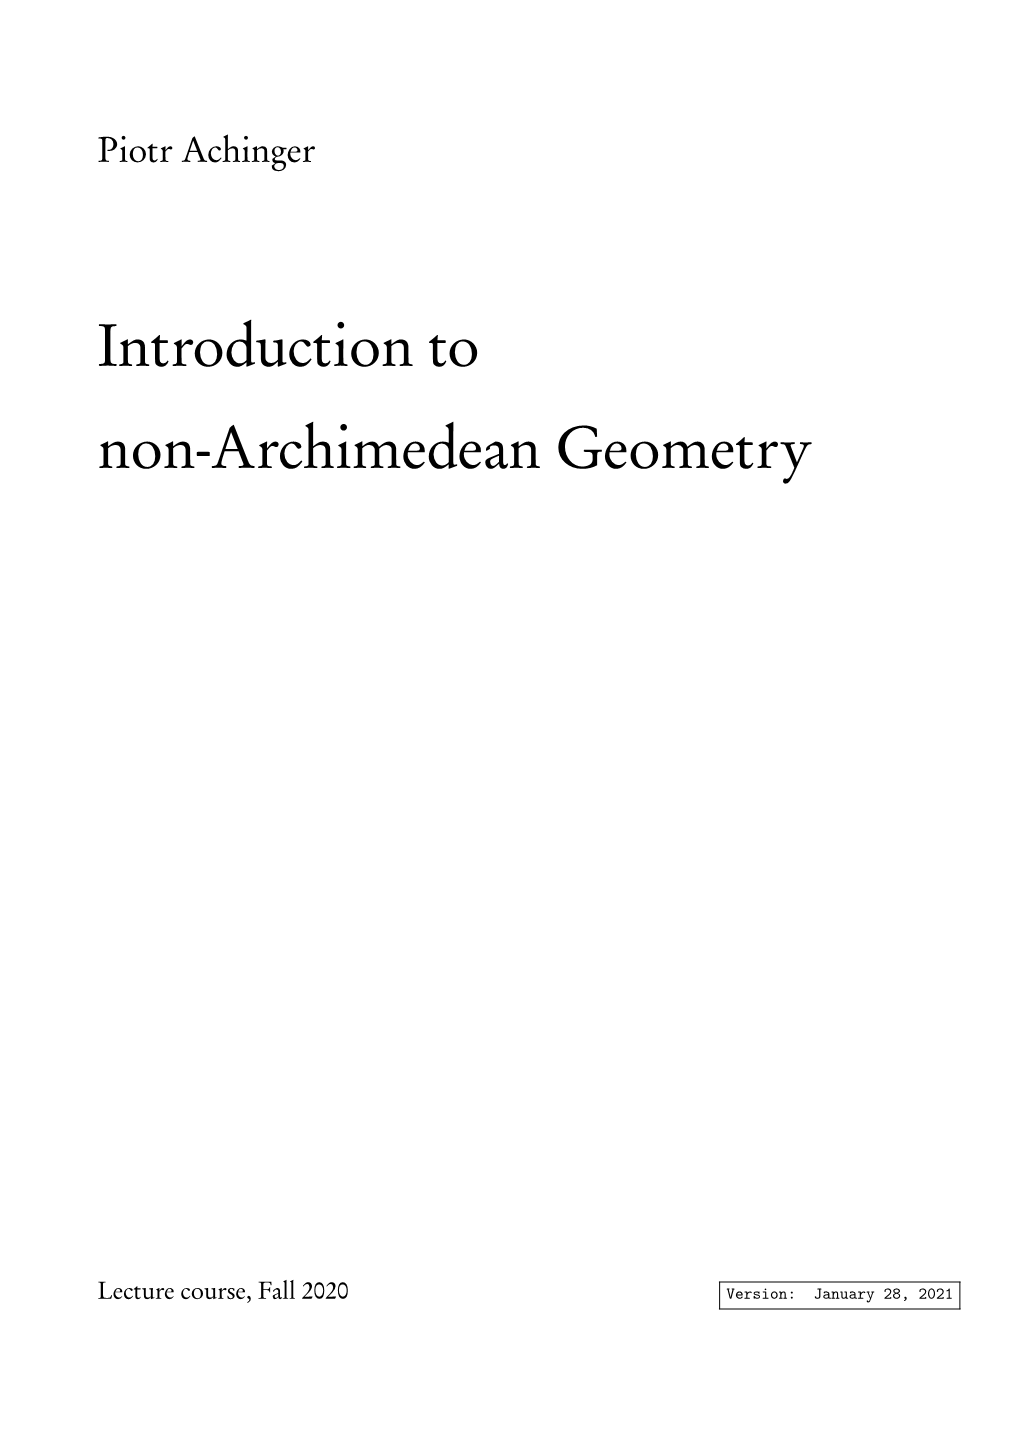 Introduction to Non-Archimedean Geometry